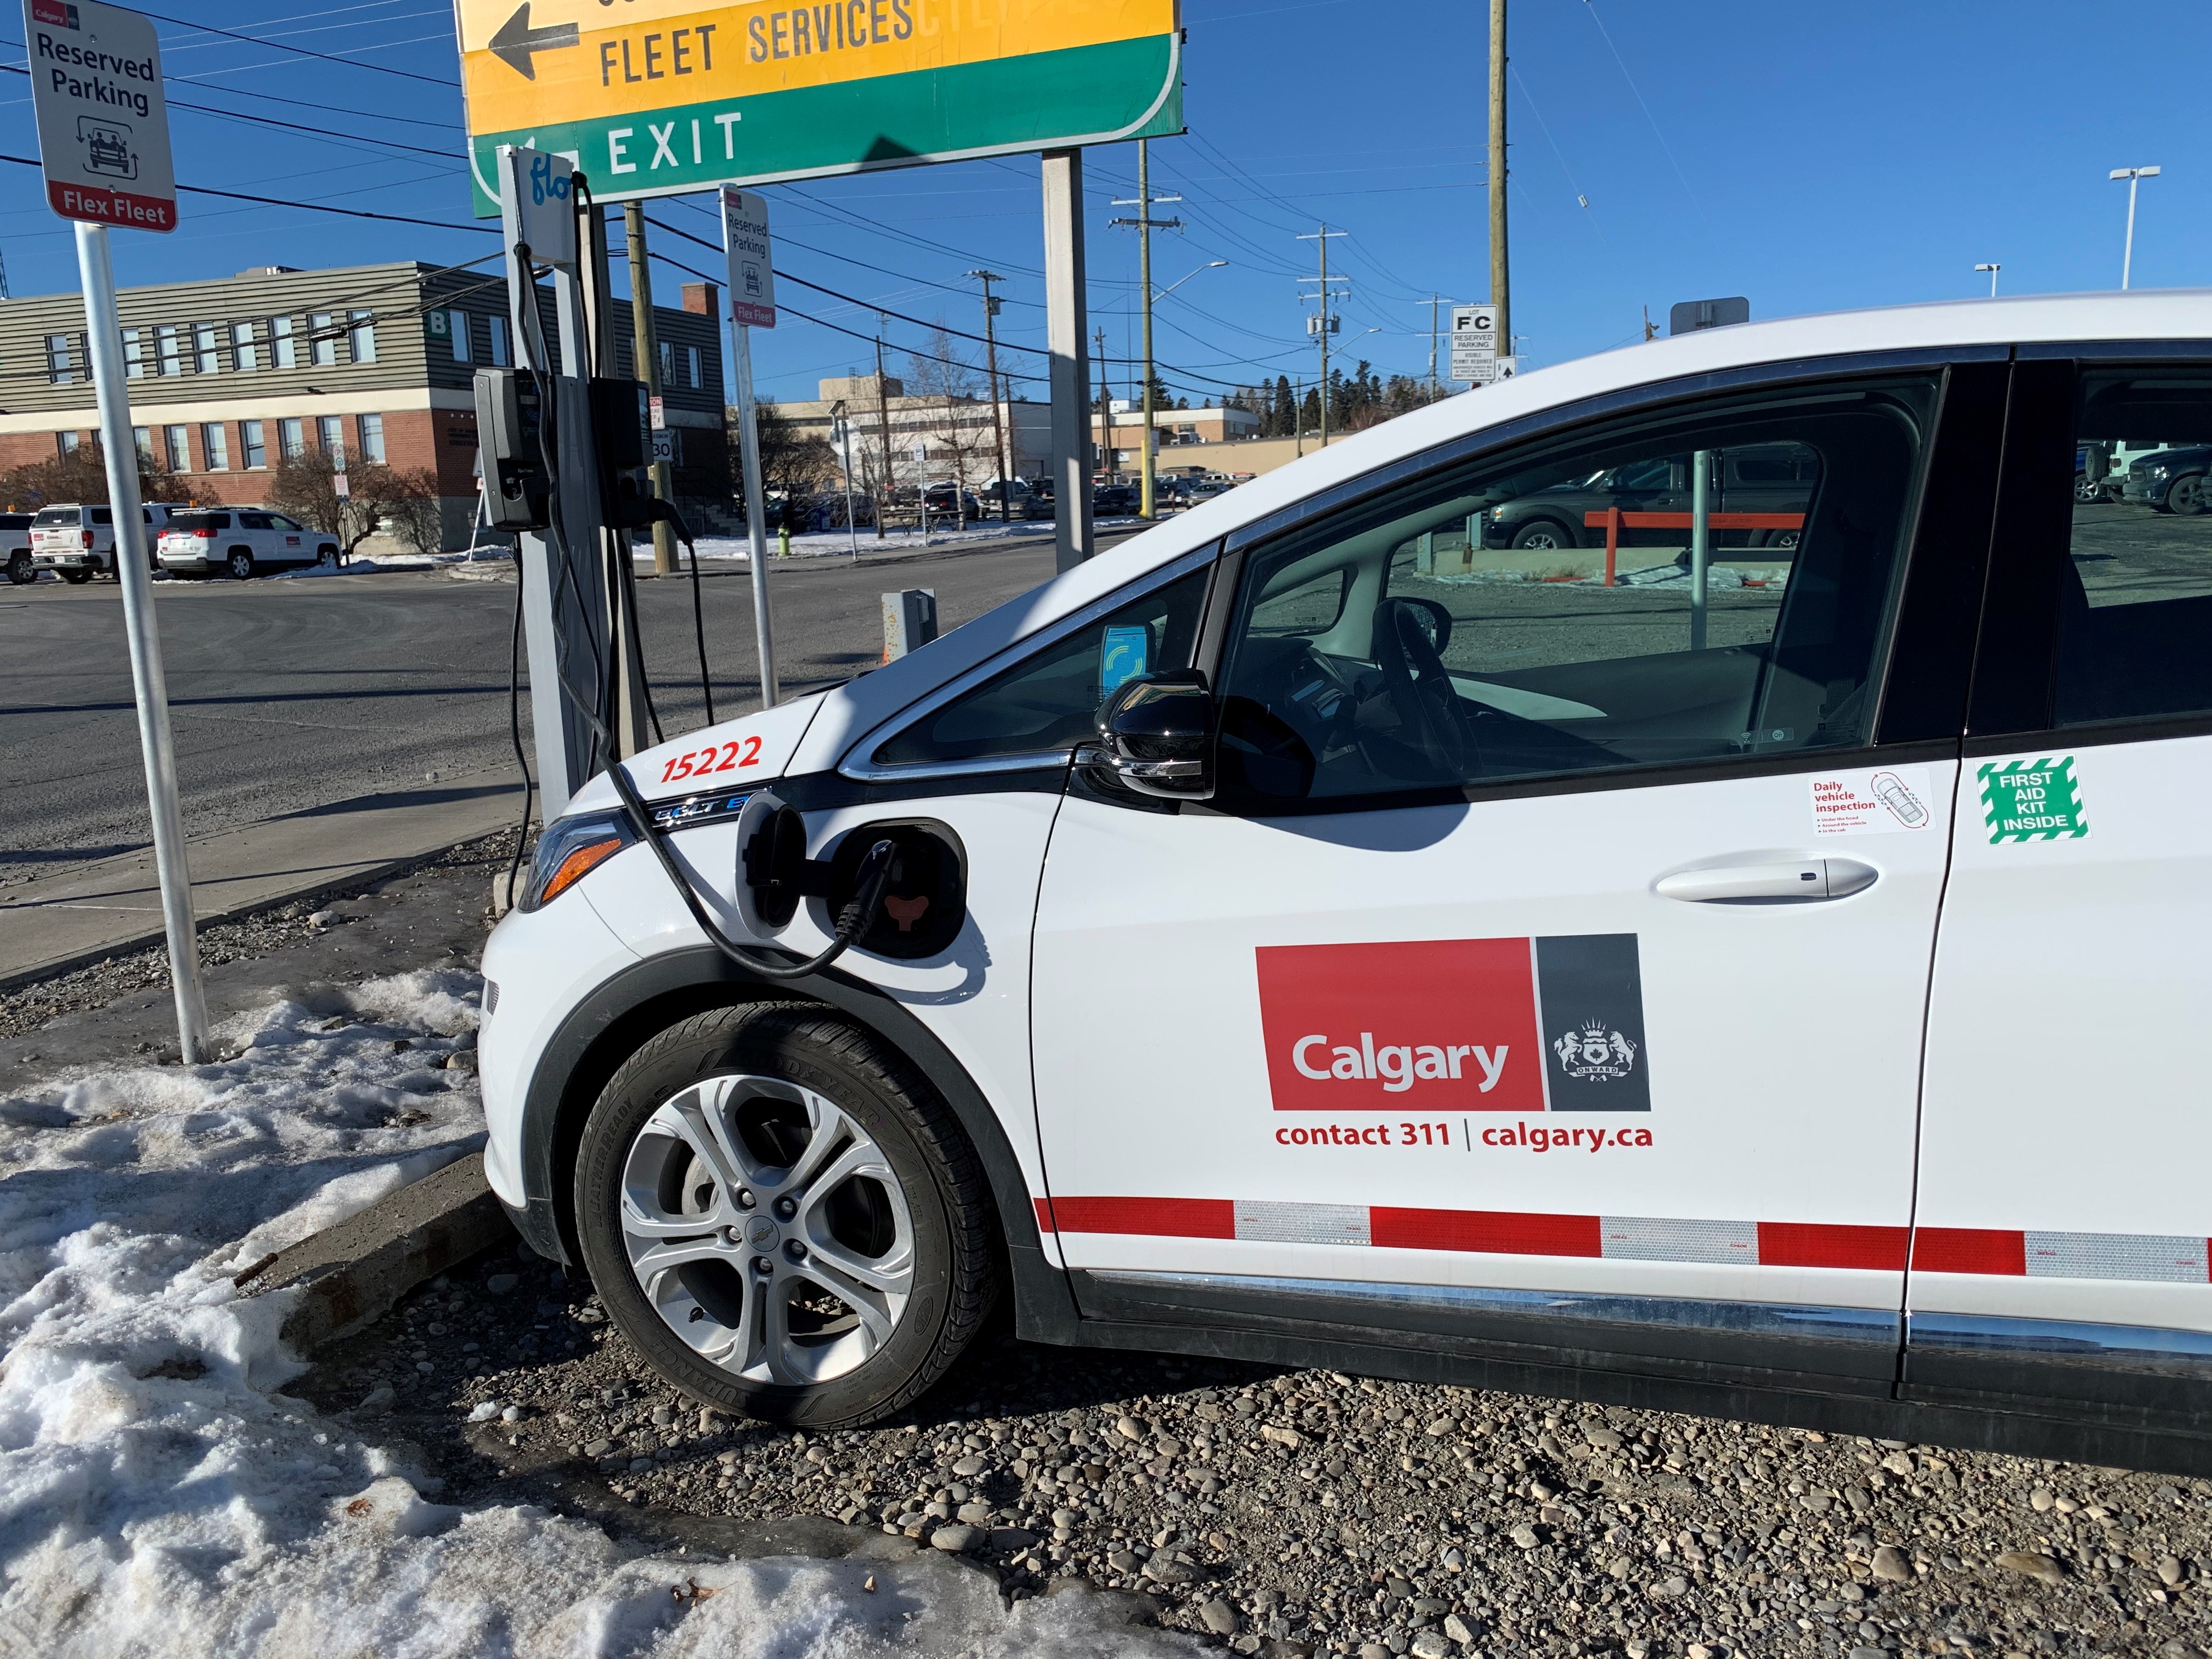 One of calgary's new EV's at a charging station